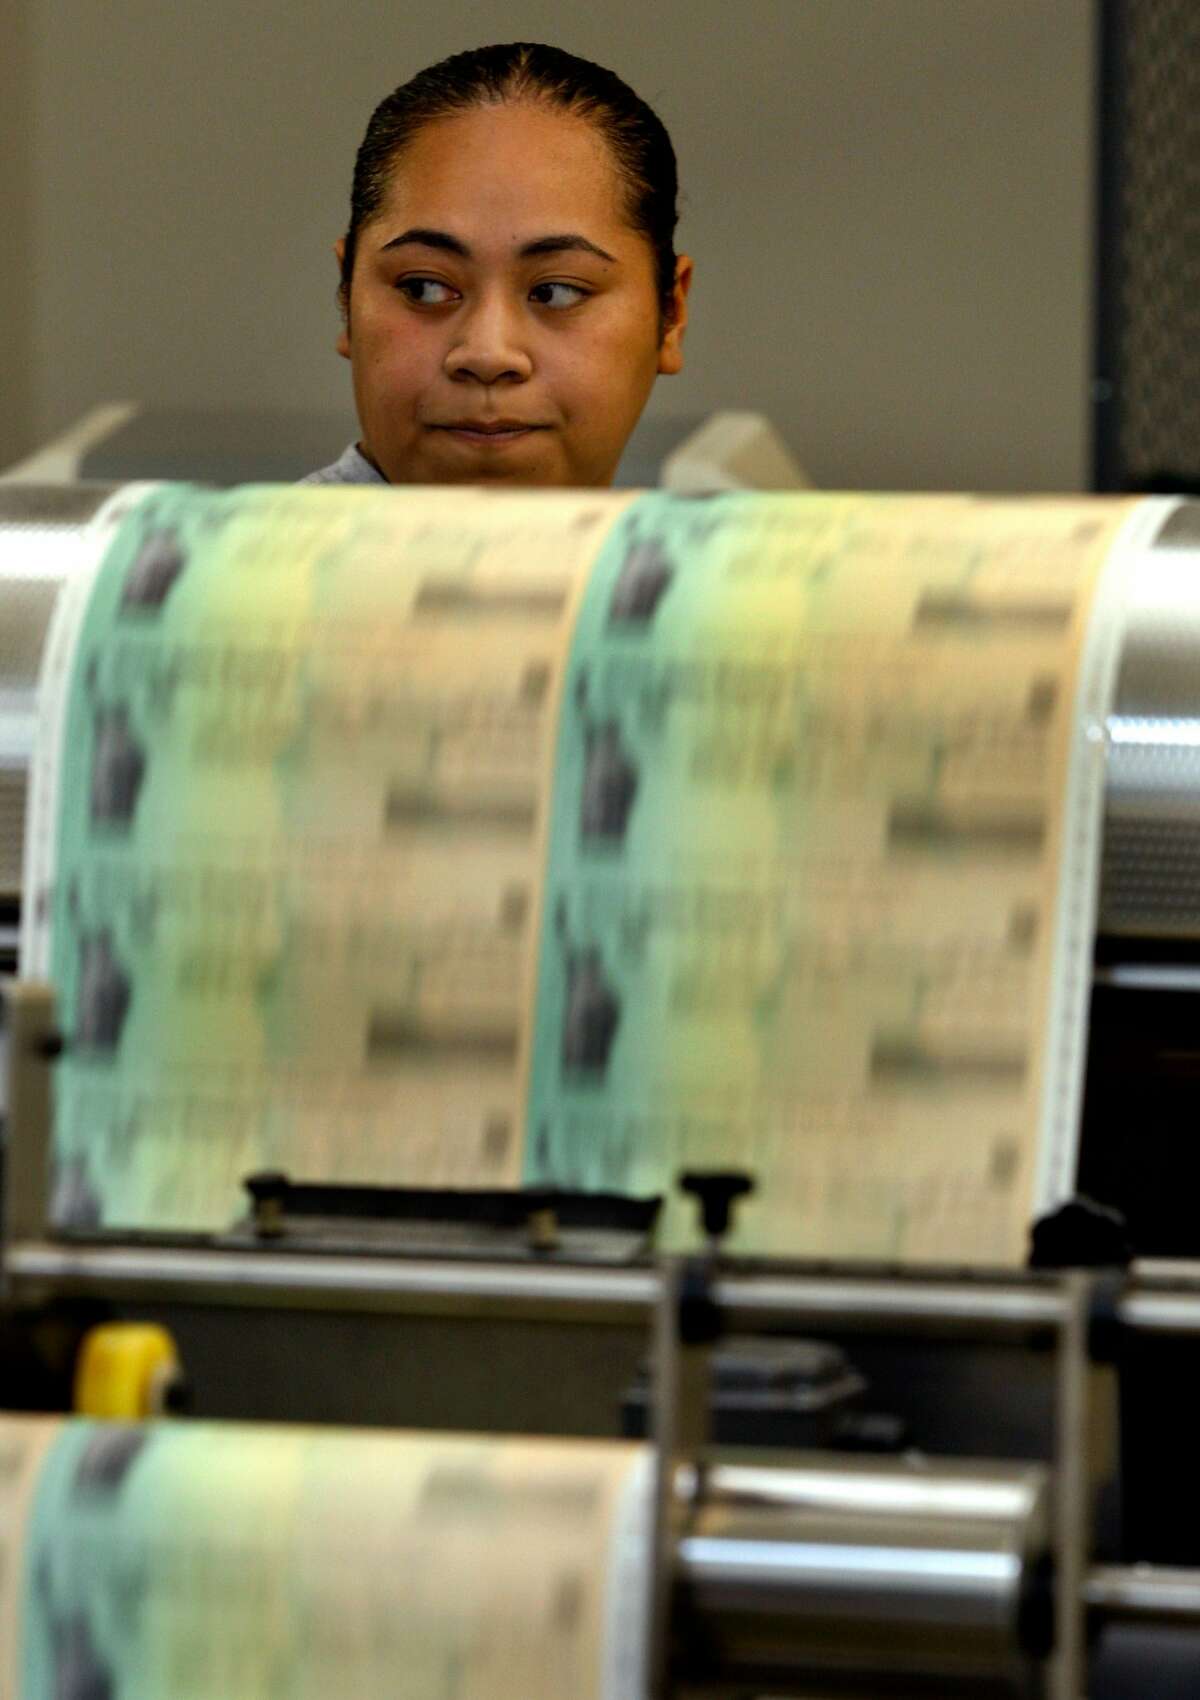 Elitisi Fanaika monitors the progress of economic stimulus checks that are printed at a Treasury Department facility in Emeryville, Calif., on Thursday, May 7, 2009. Social Security recipients are among the millions who will receive the $250 stimulus checks.